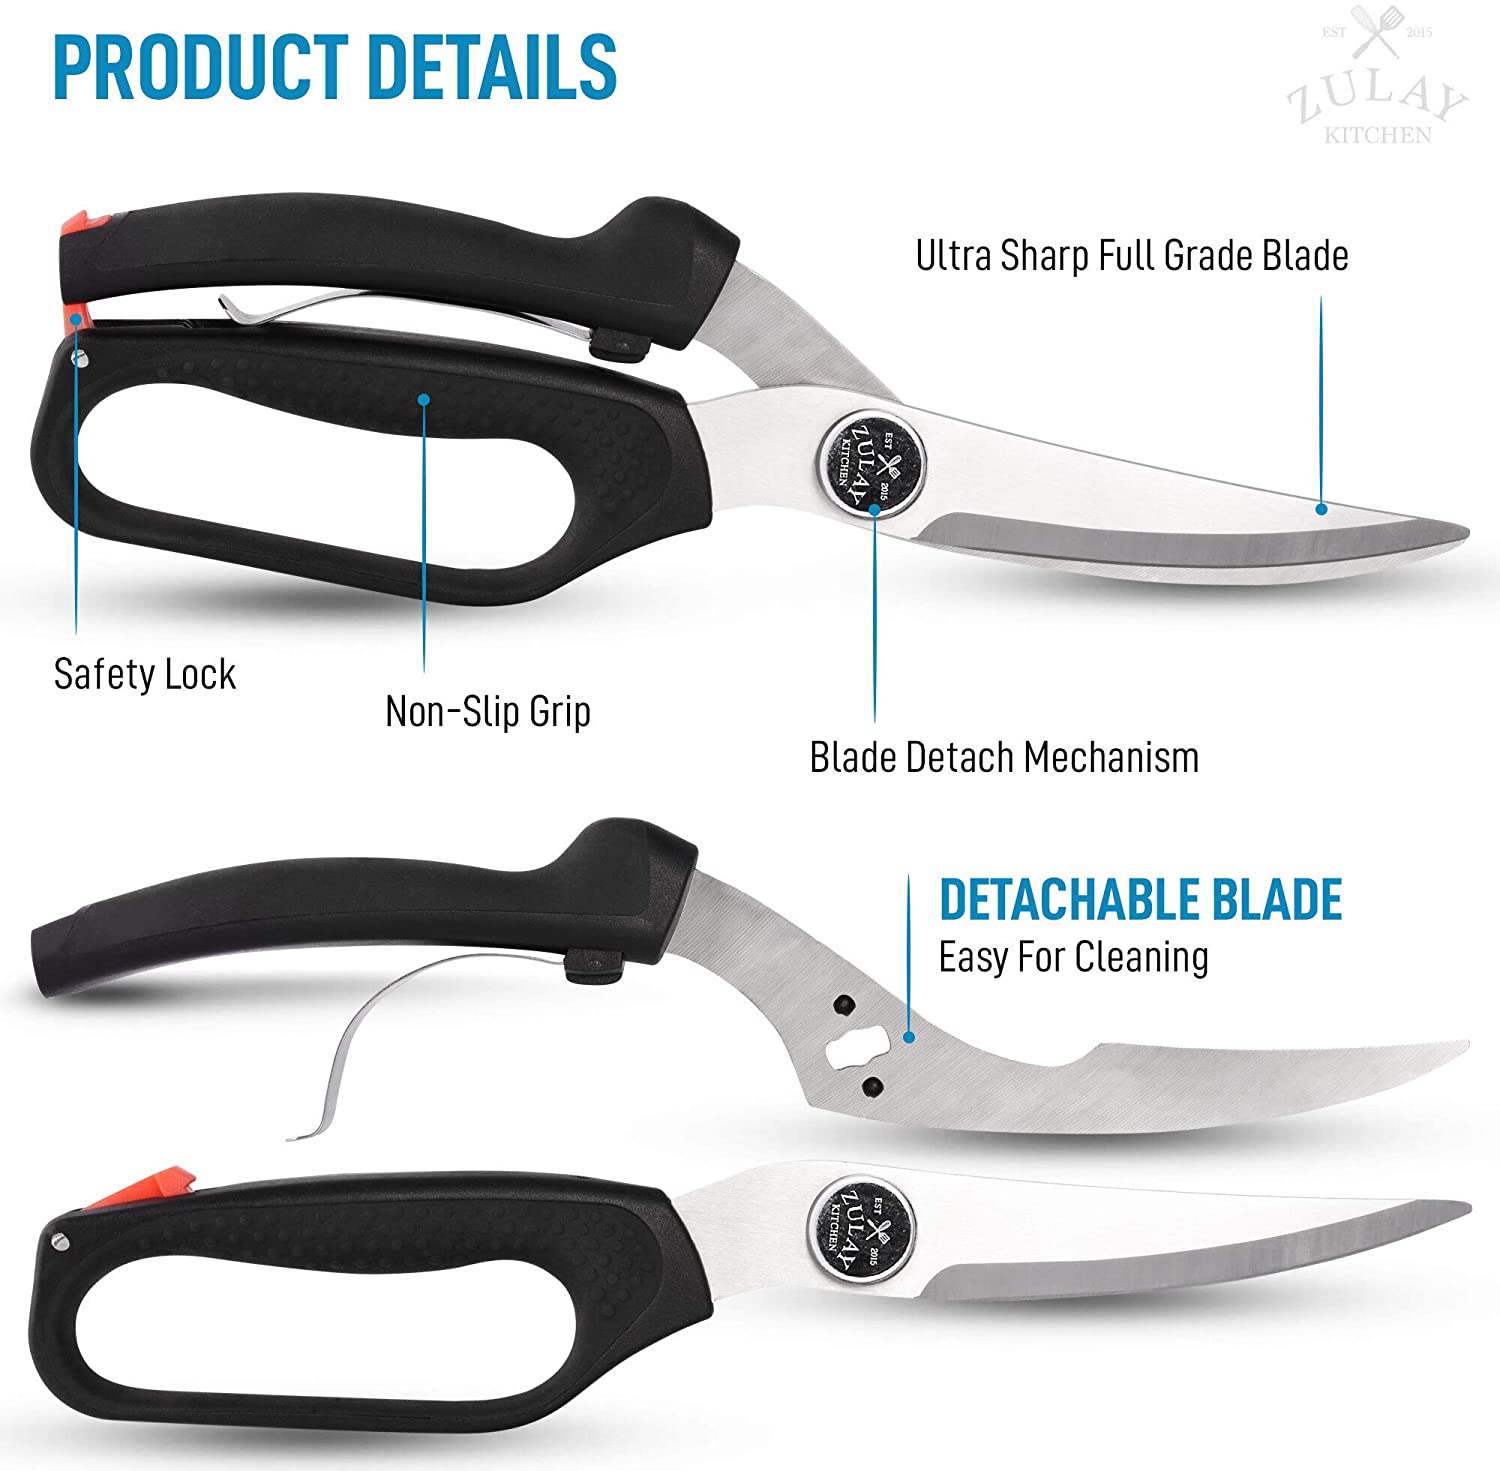 Poultry Shears - Zulay KitchenZulay Kitchen